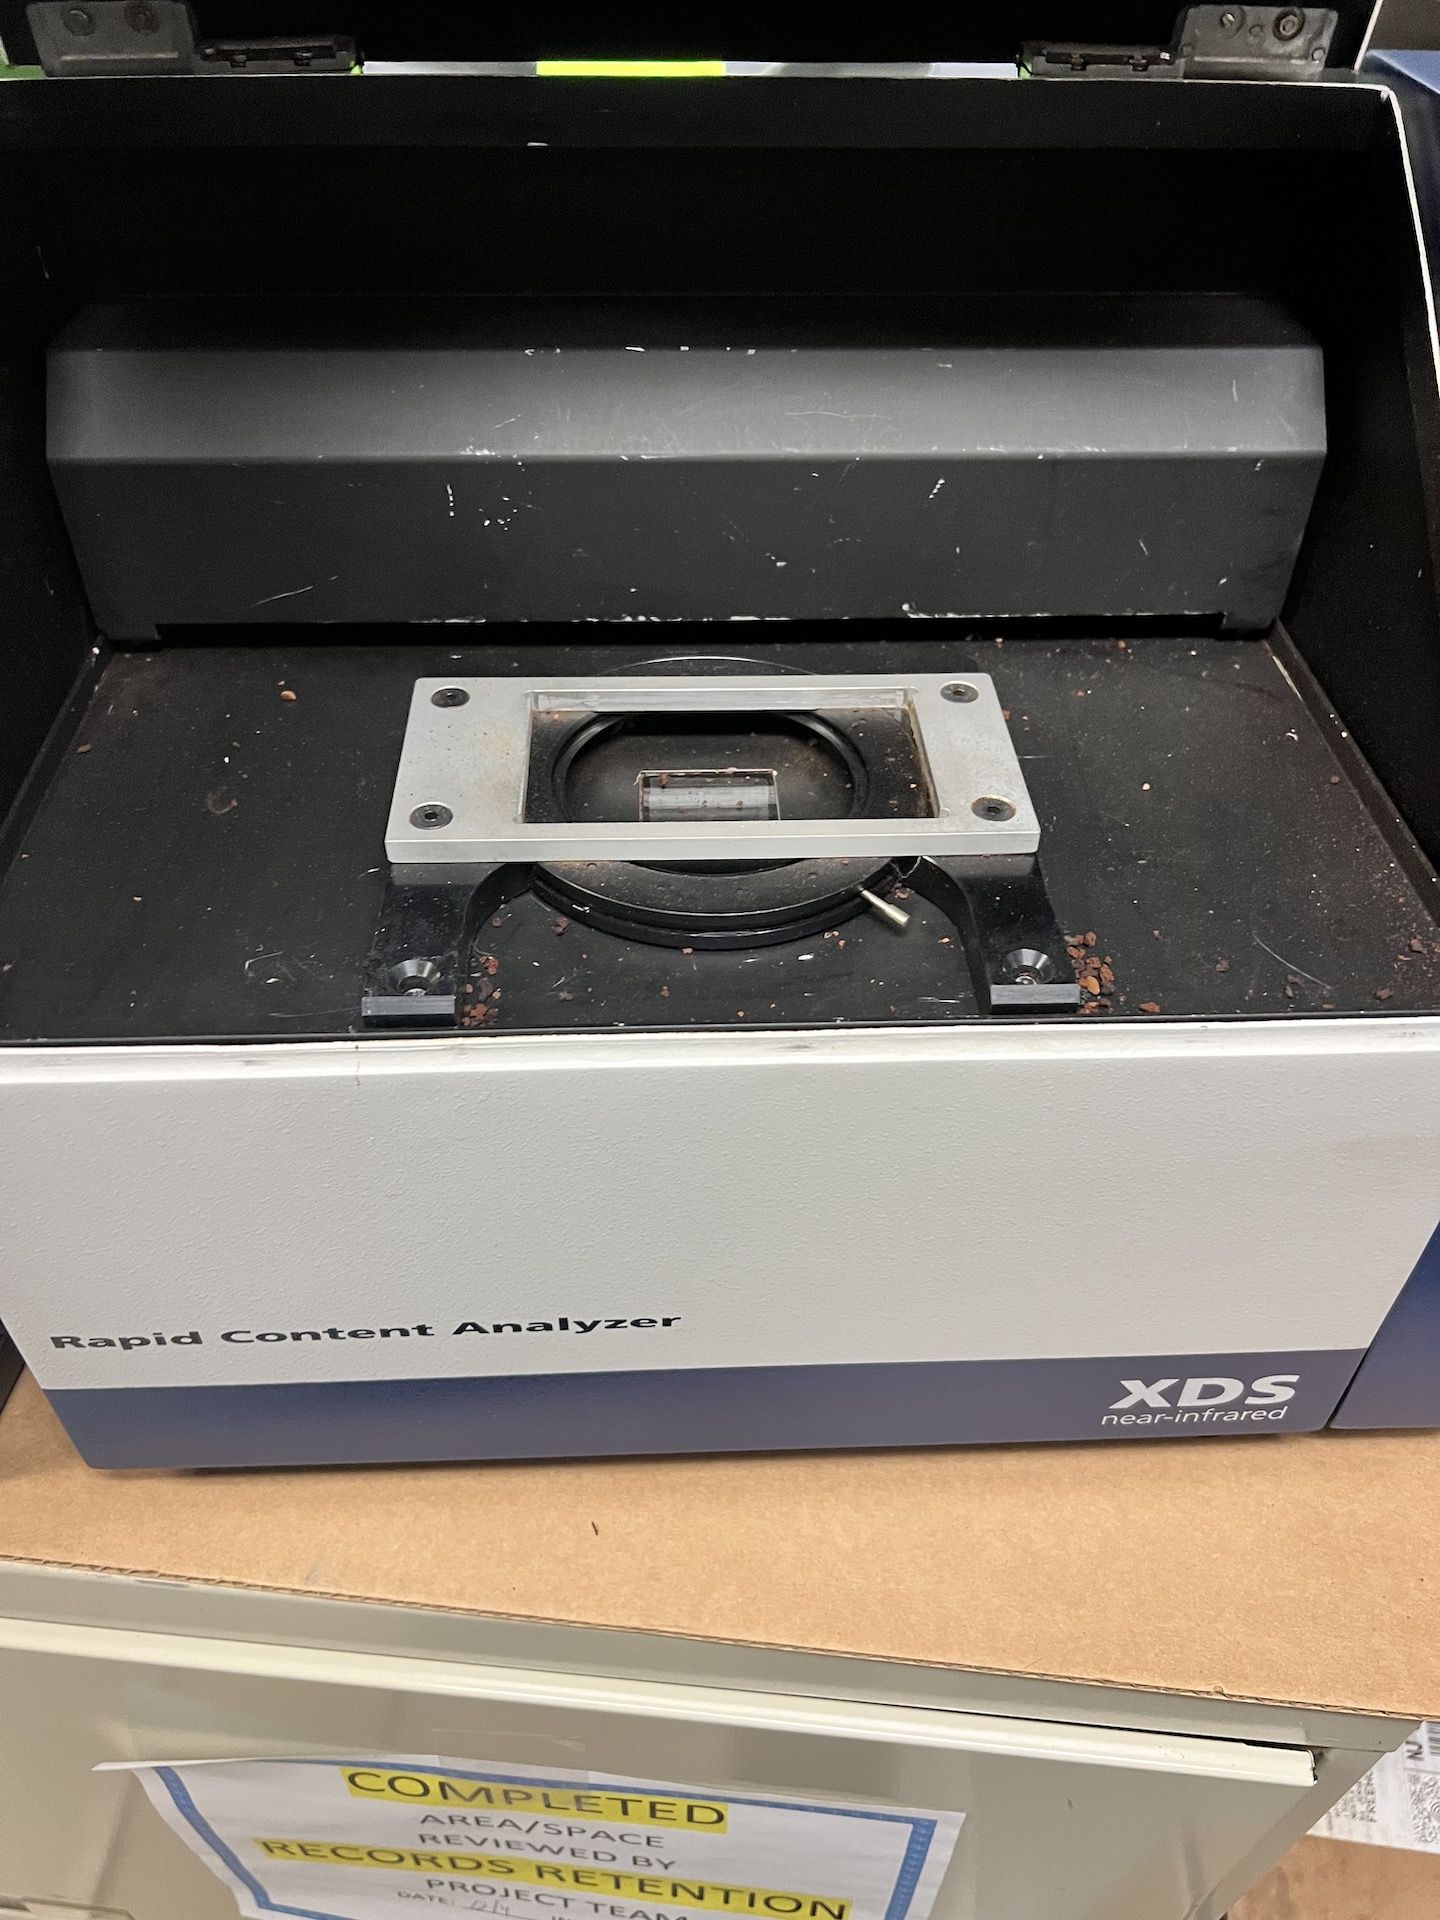 FOSS XDS NEAR INFRARED RAPID CONTENT ANALYZER WITH XDS MONOCROMATOR TYPE XM-1000, XM-1100 SERIES - Image 5 of 16